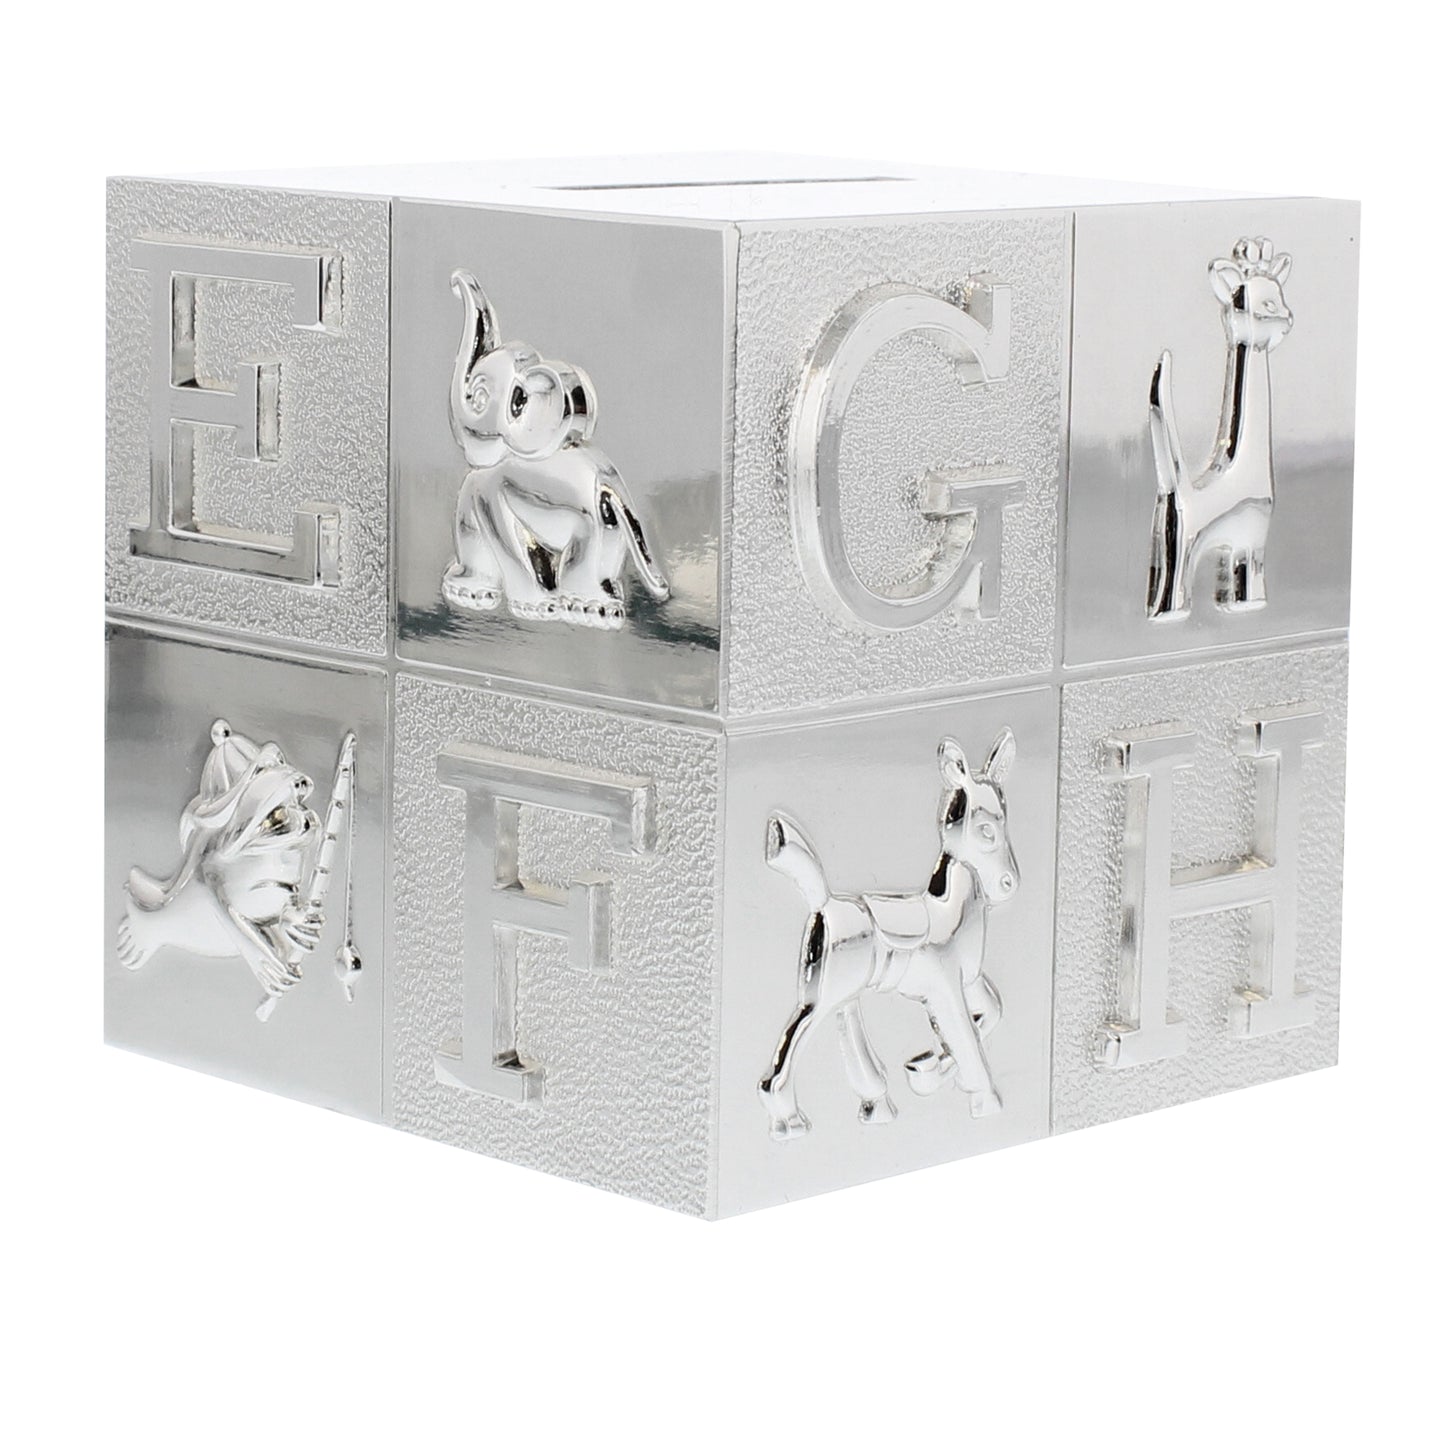 Close up of two sides of silver money box showing alphabet and animal characters